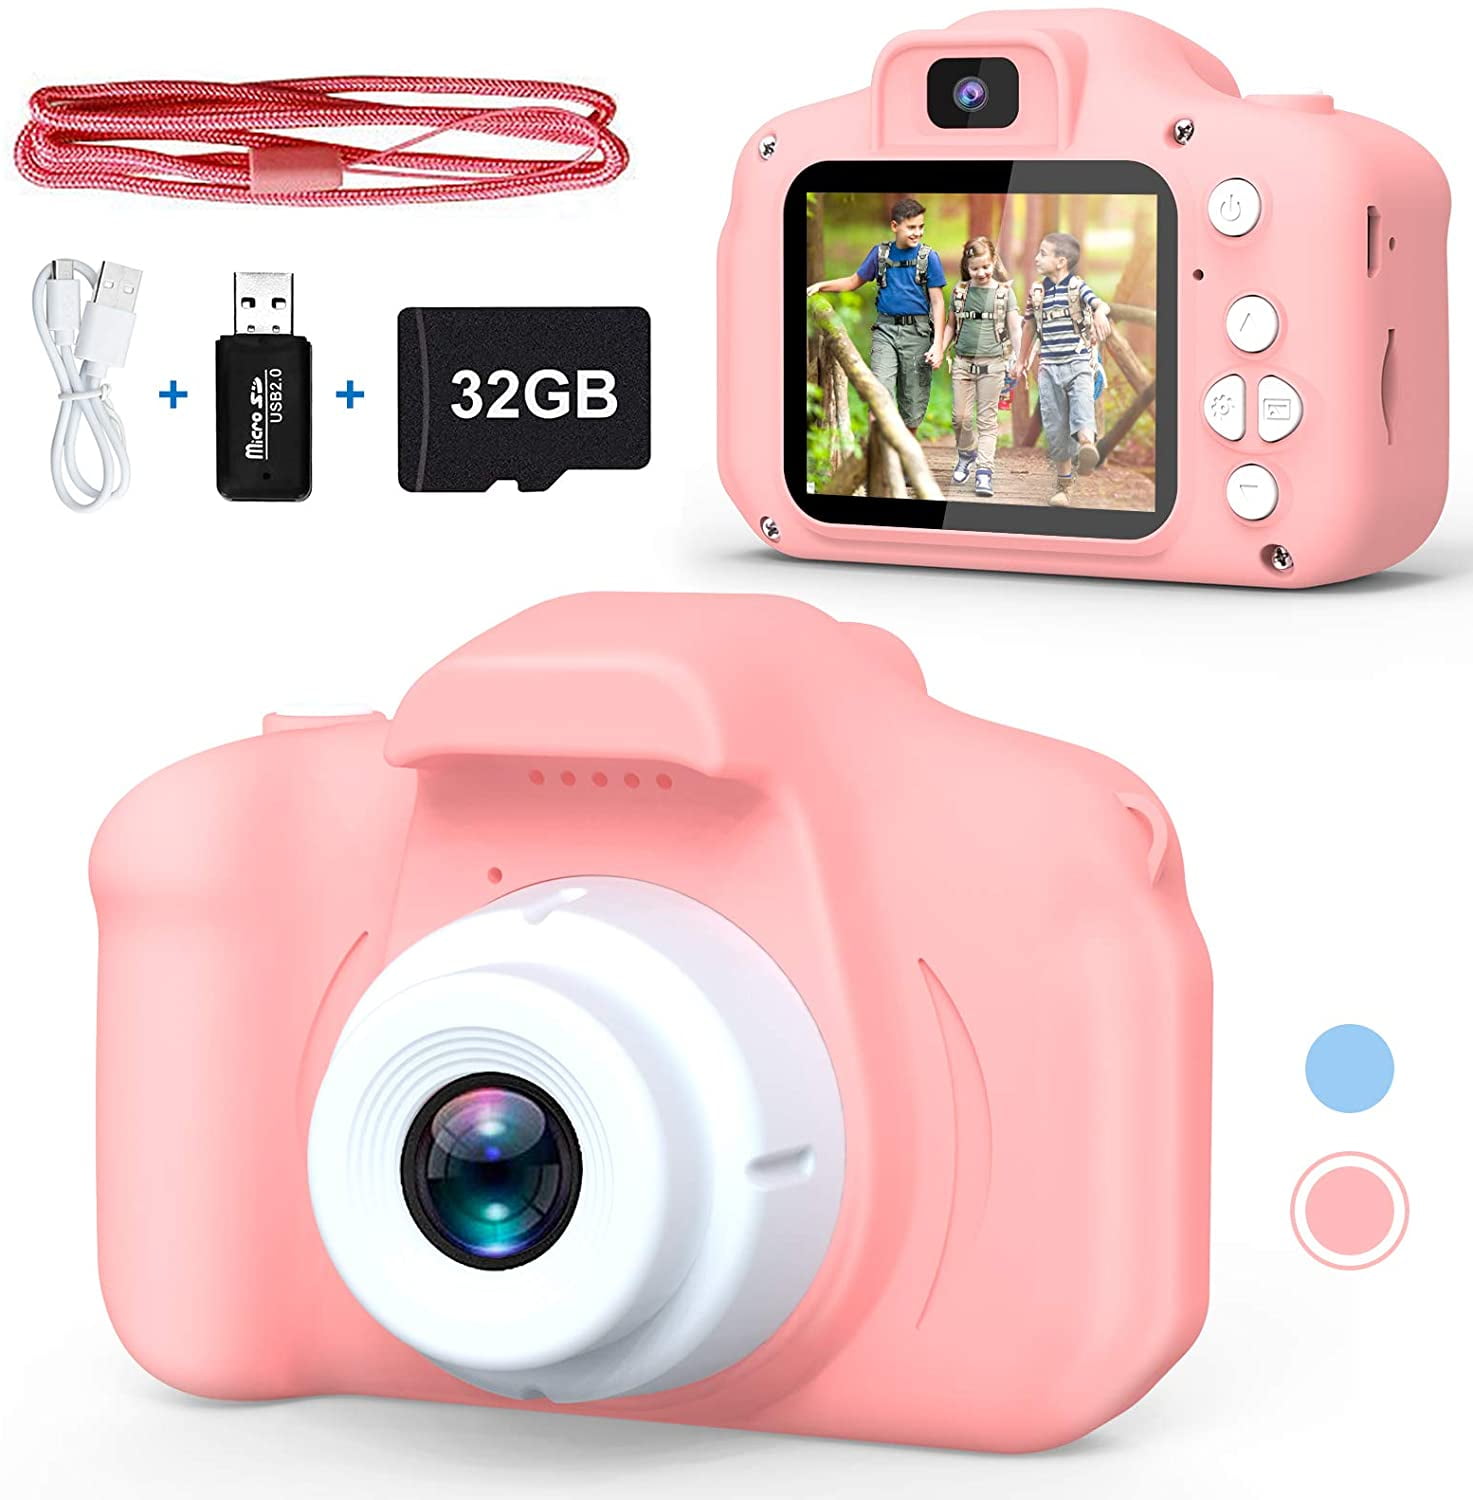 Pink DEPAADER Kids Camera Toys for 3-12 Year Old Girls,Christmas Birthday Gift 2.4 Inch HD Digital Selfie Camera for Kid,Children Video Camera for Age 6 7 8 9 10 Toddler with 32GB SD Card 